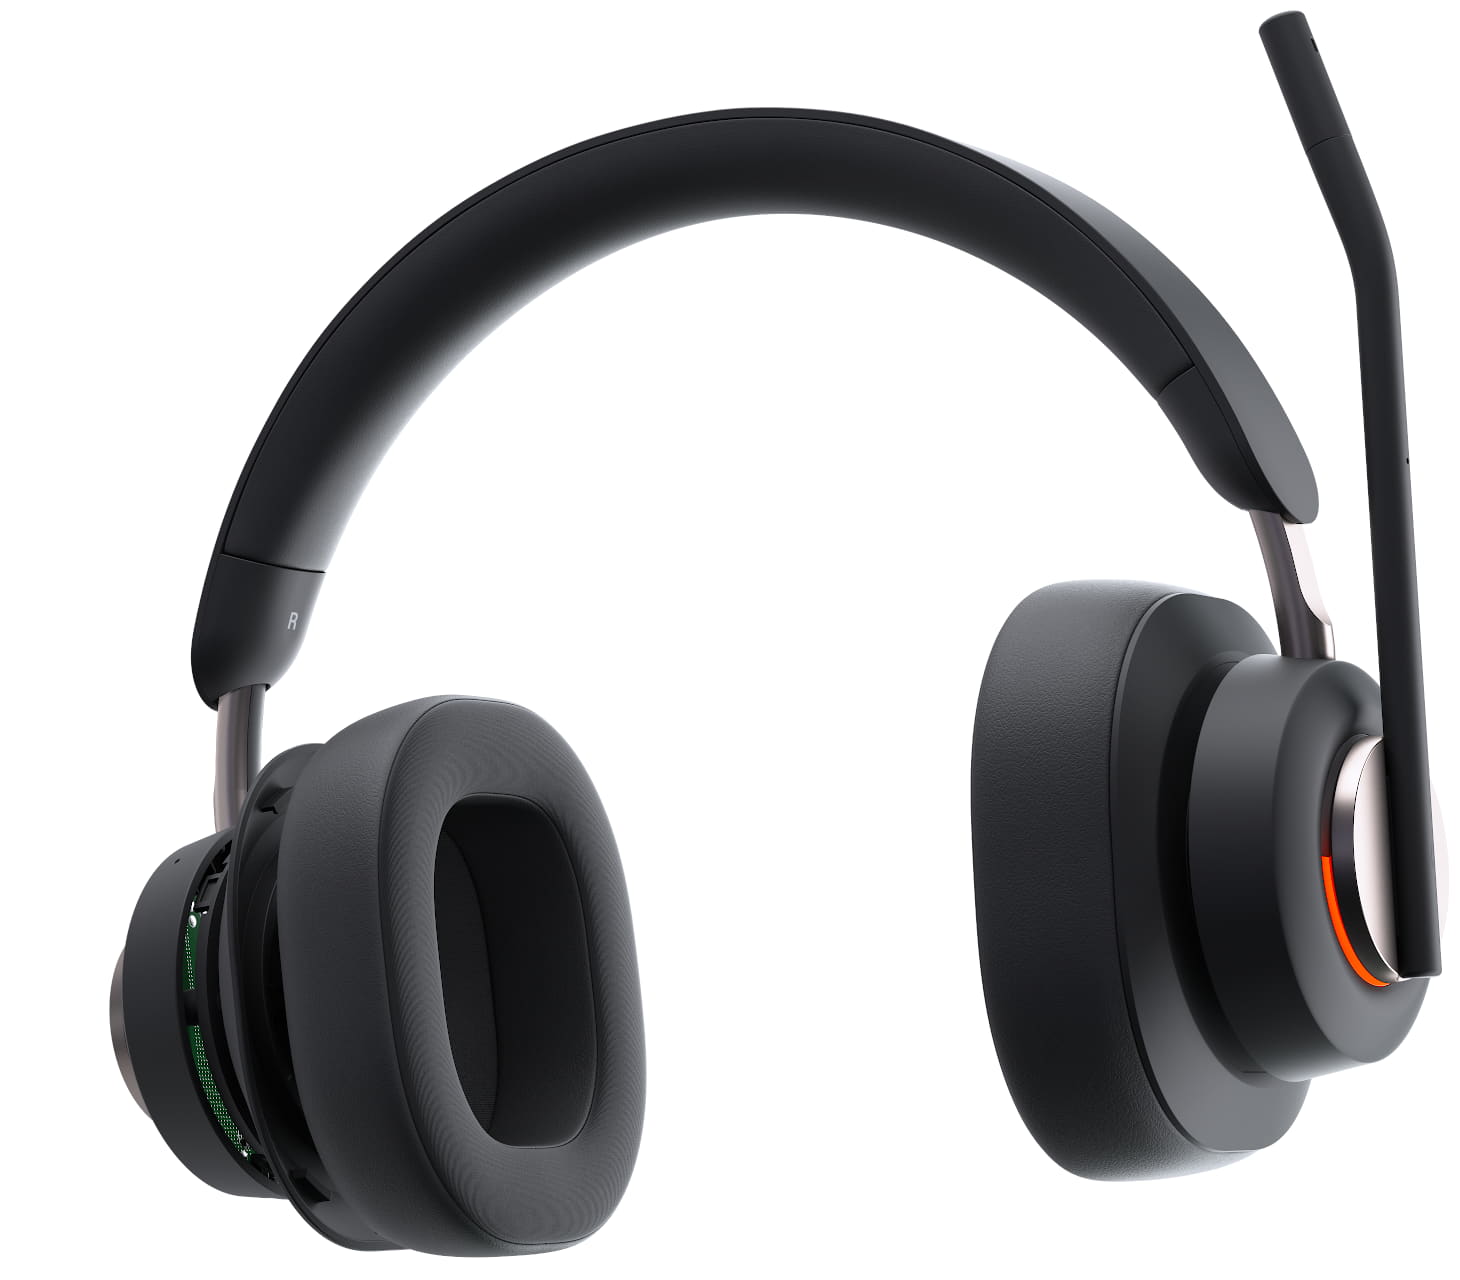 Close up front view of Kensington H3000 Bluetooth Over-Ear Headset with busy light illuminated, mic in flip-to-mute position, and right ear cup expanding to show technology